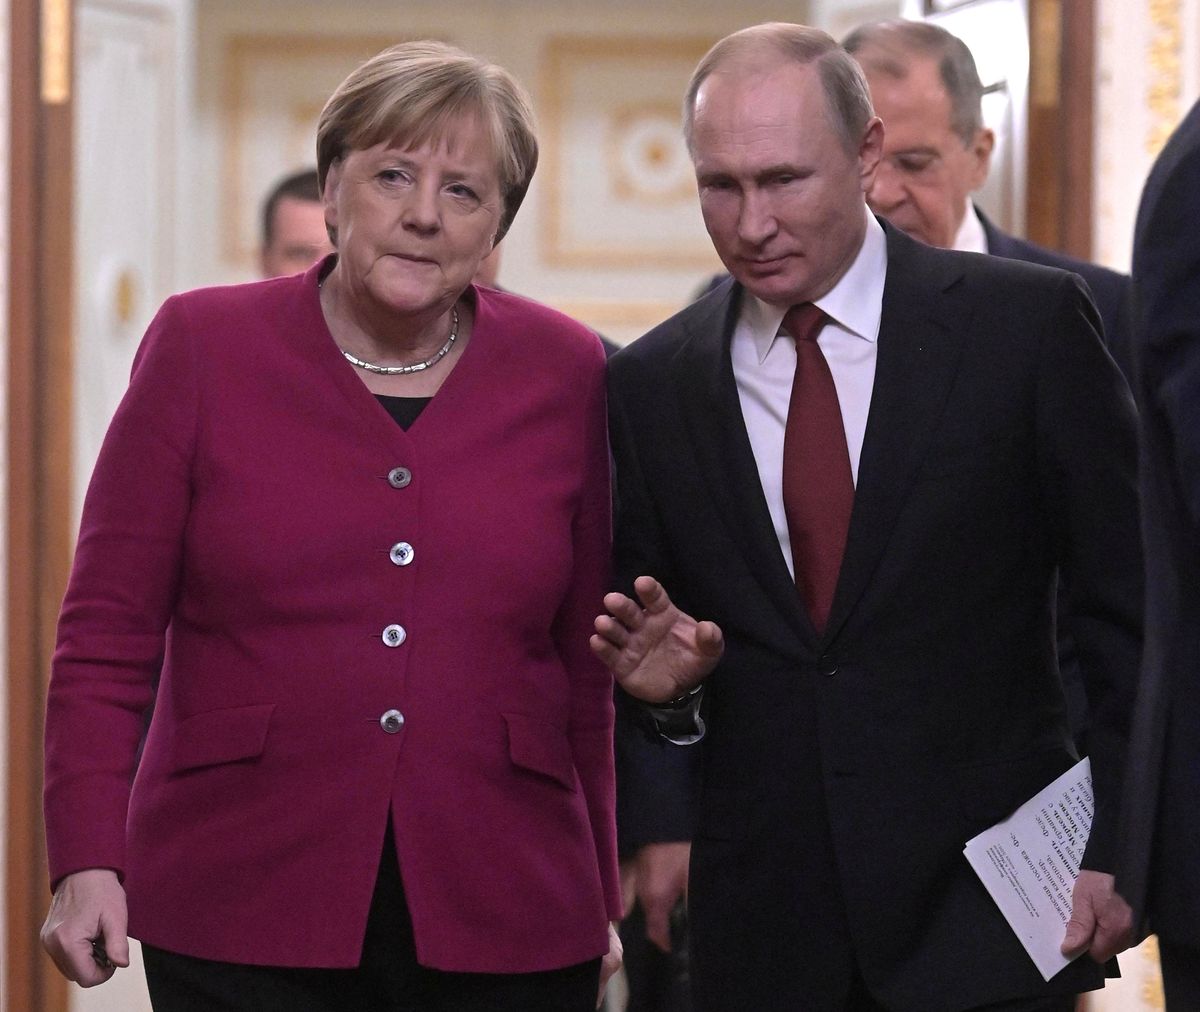 Russian President Vladimir Putin and German Chancellor Angela Merkel arrive for a joint news conference in Moscow